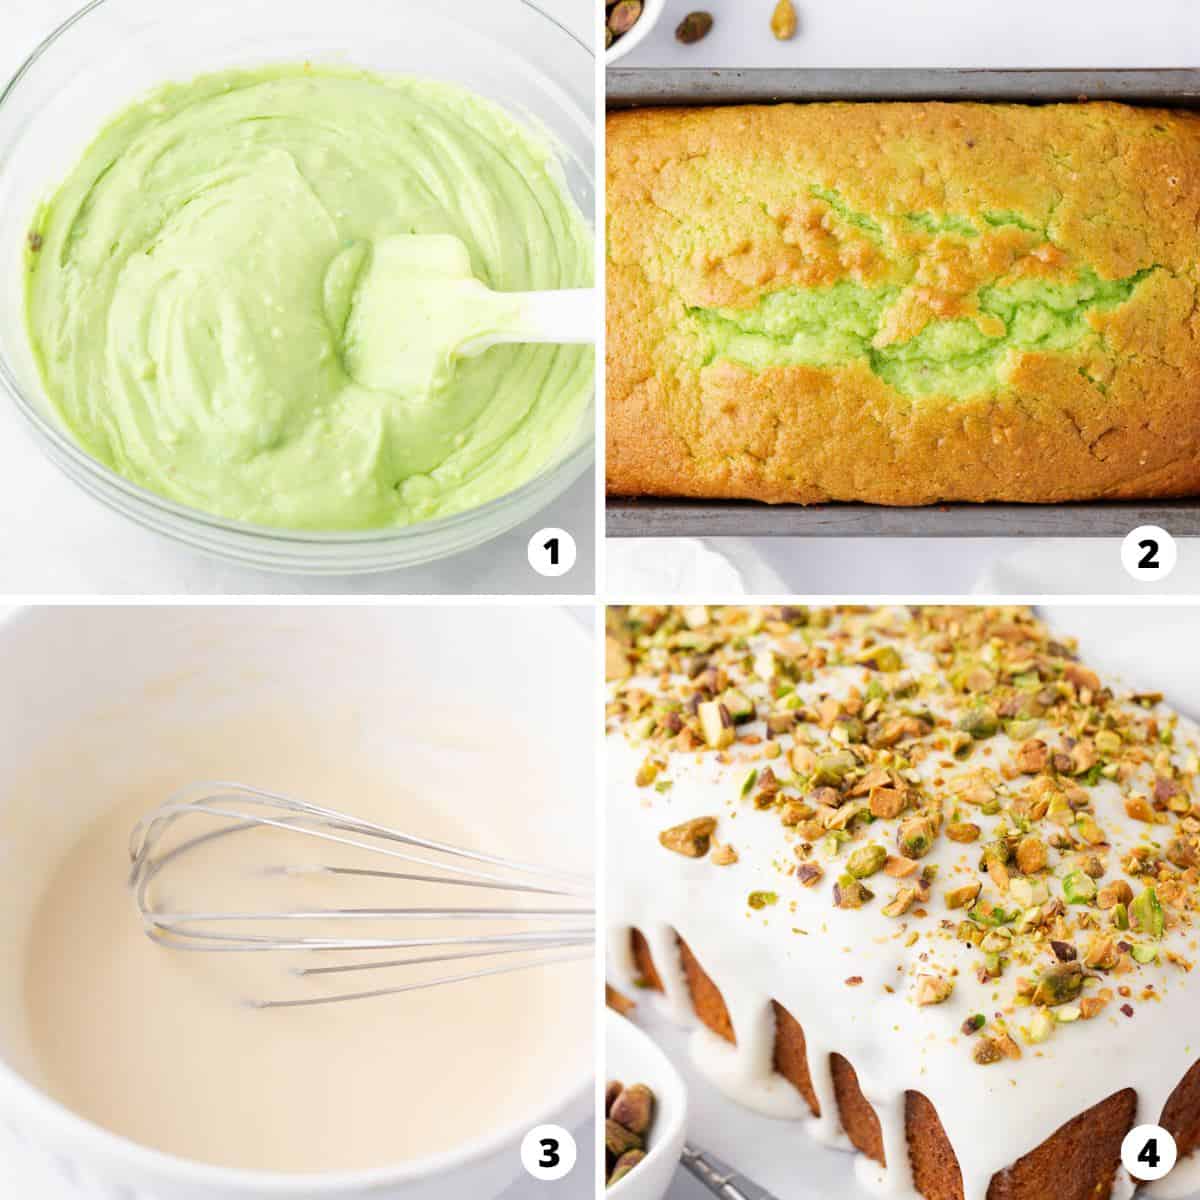 Showing how to make pistachio bread in a 4 step collage.